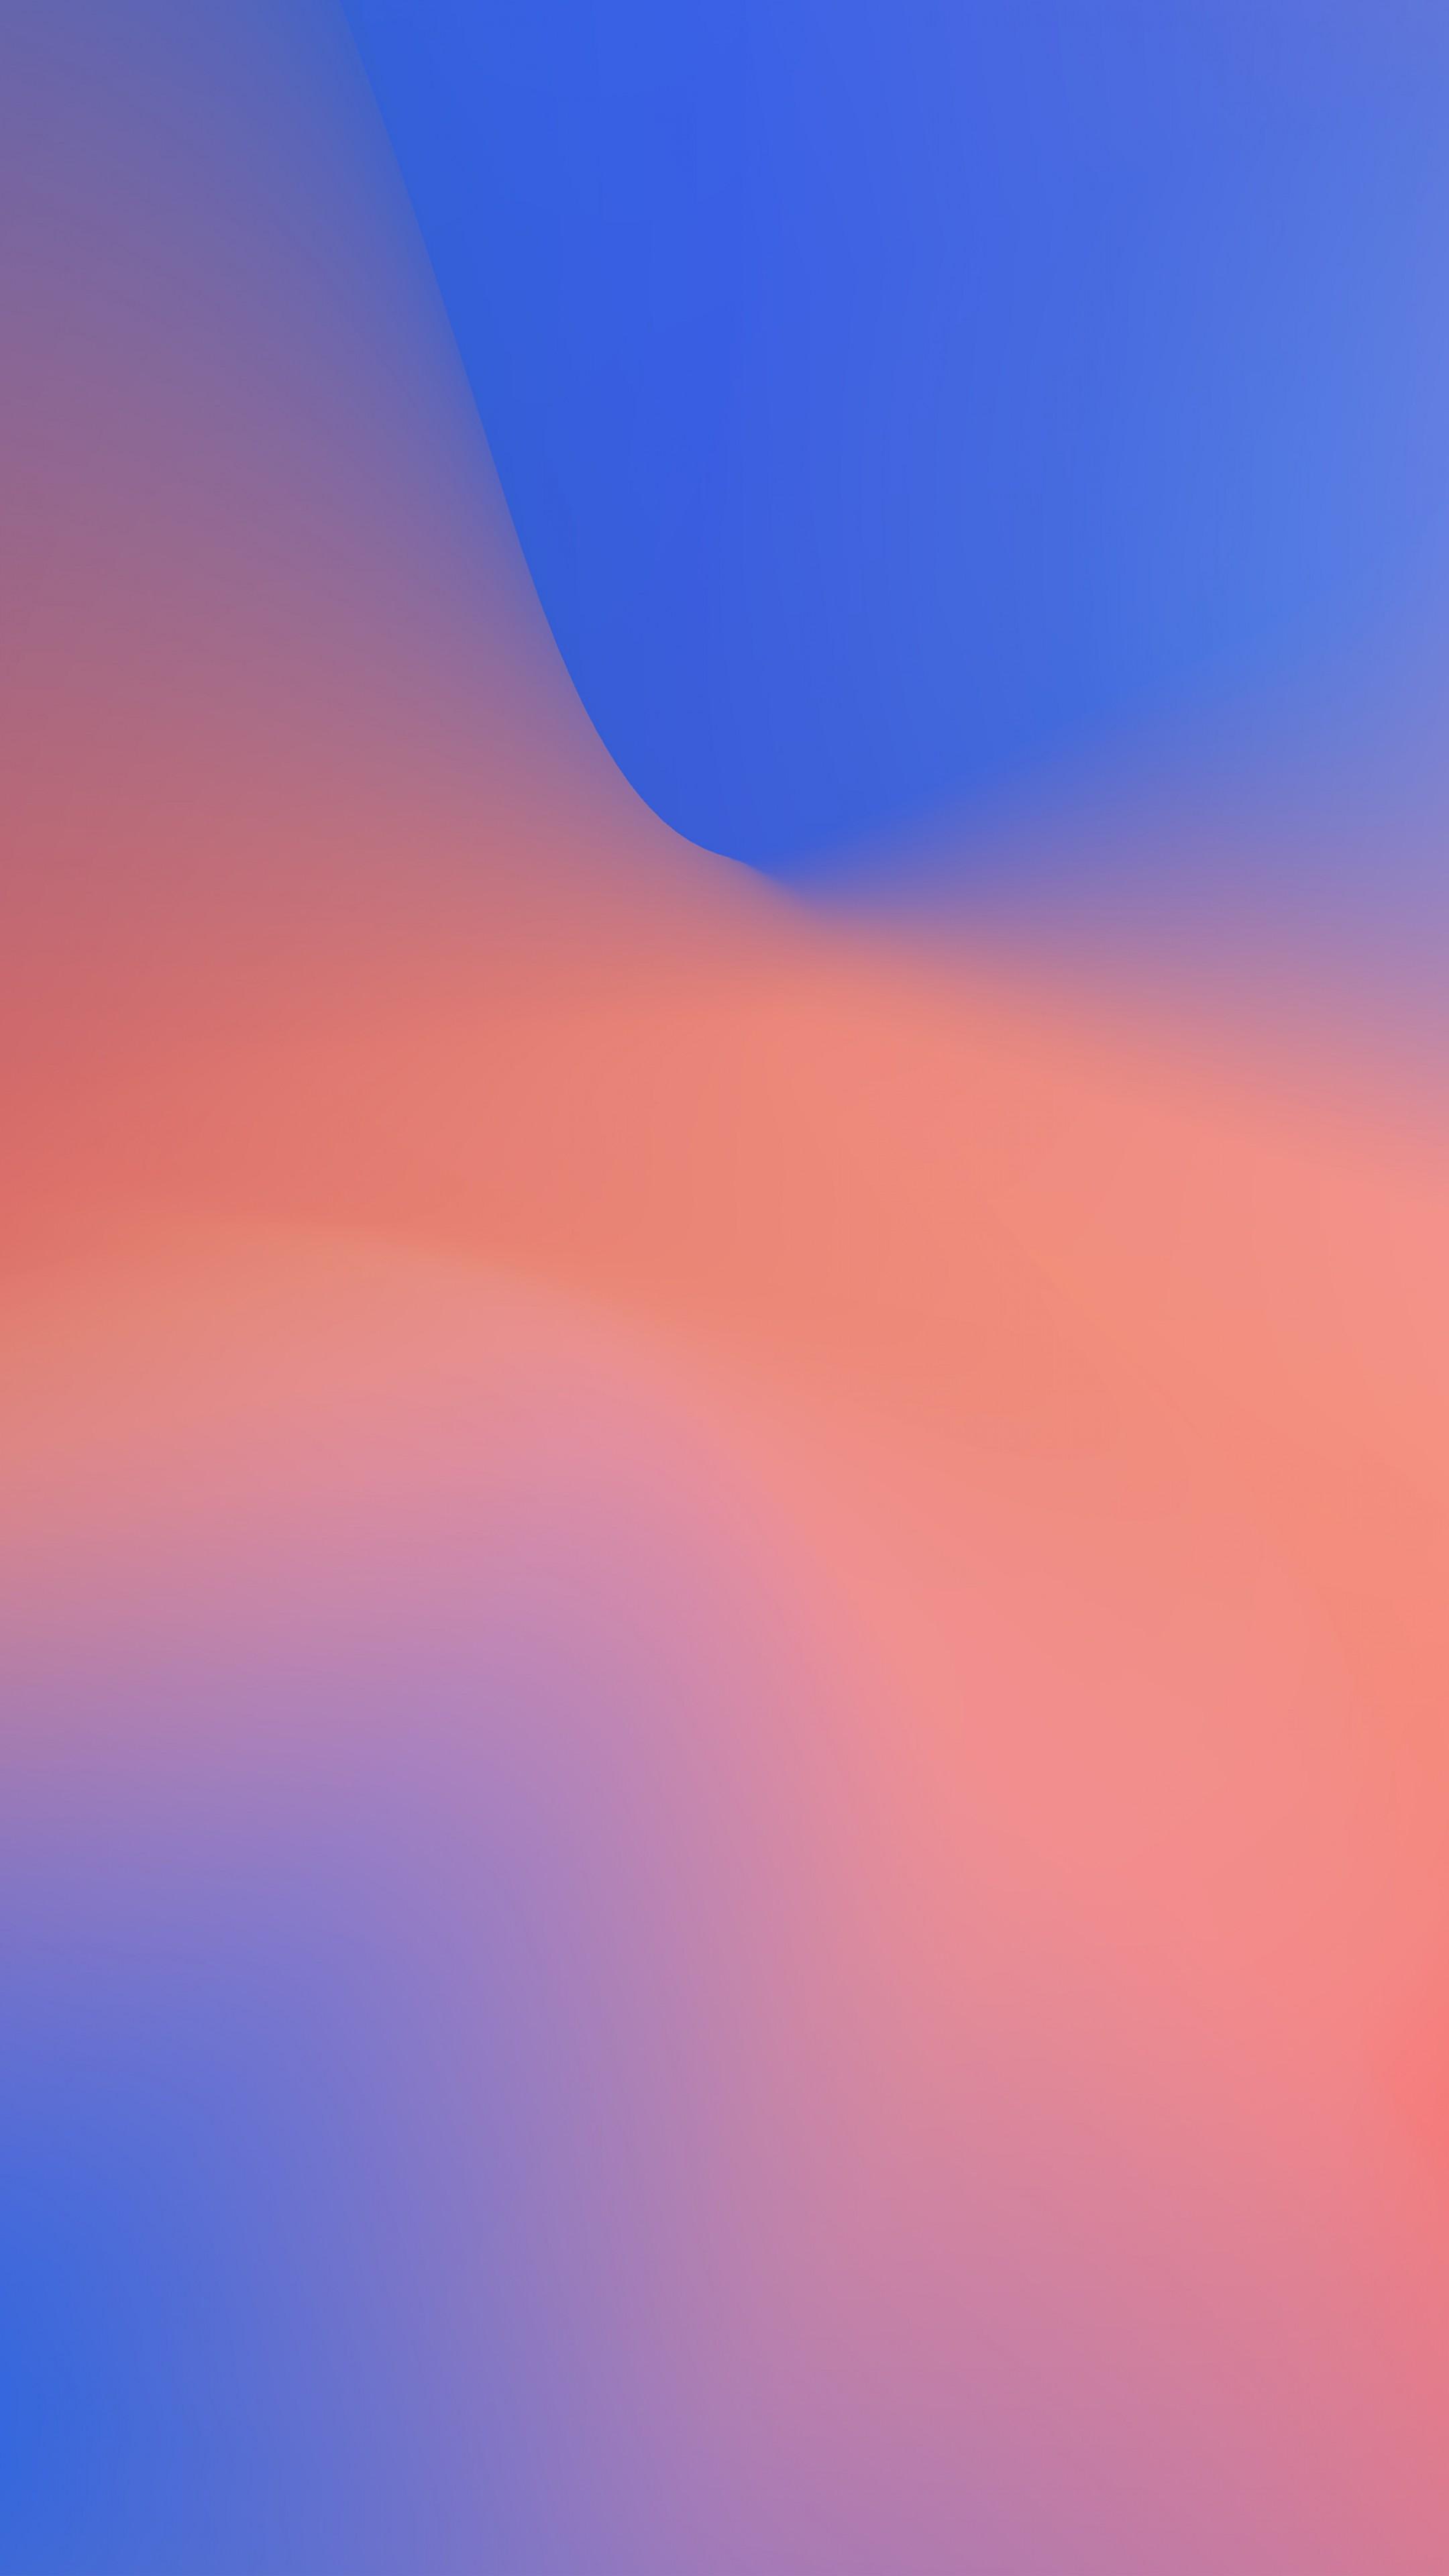 Android Pie Wallpaper 4k